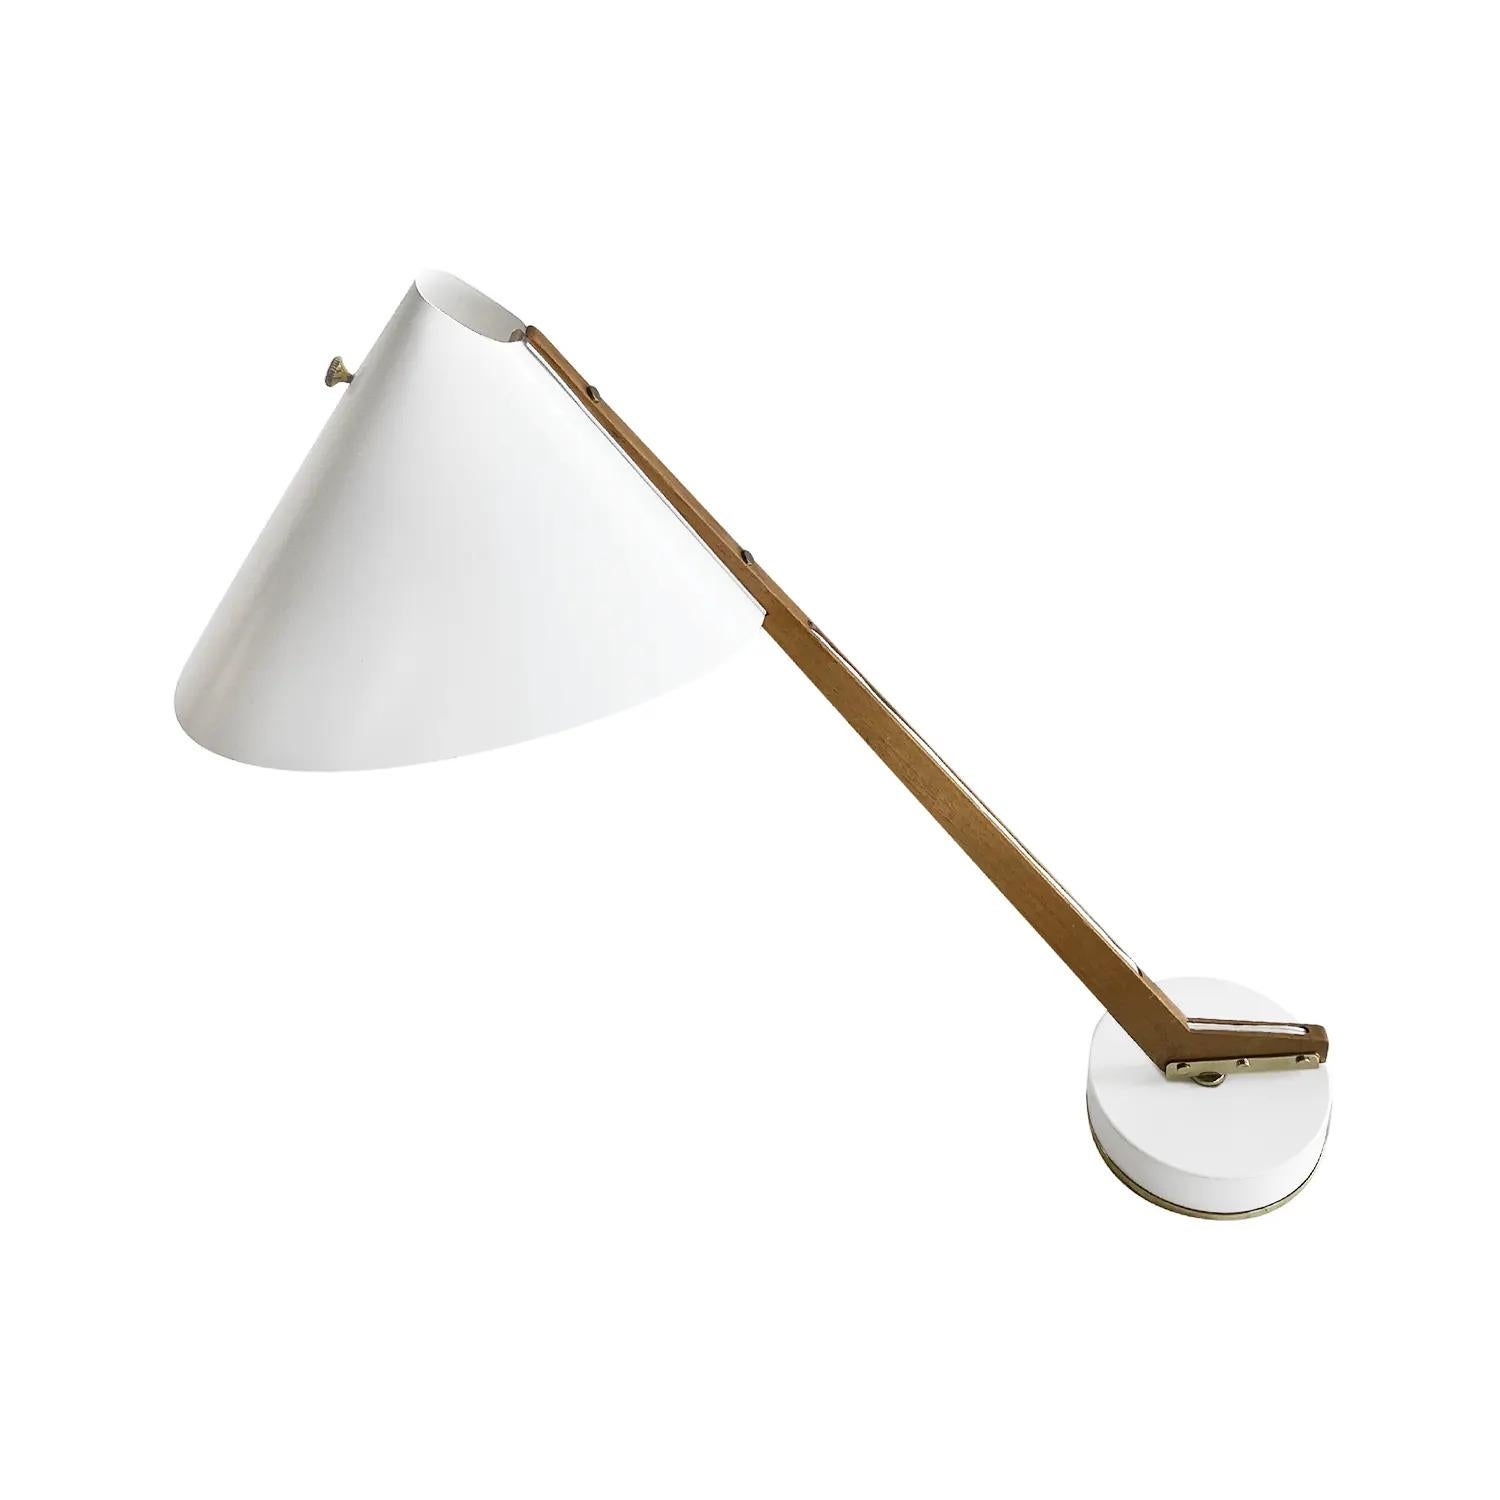 20th Century White Swedish Teak Markaryd Desk Lamp, Light by Hans-Agne Jakobsson In Good Condition For Sale In West Palm Beach, FL